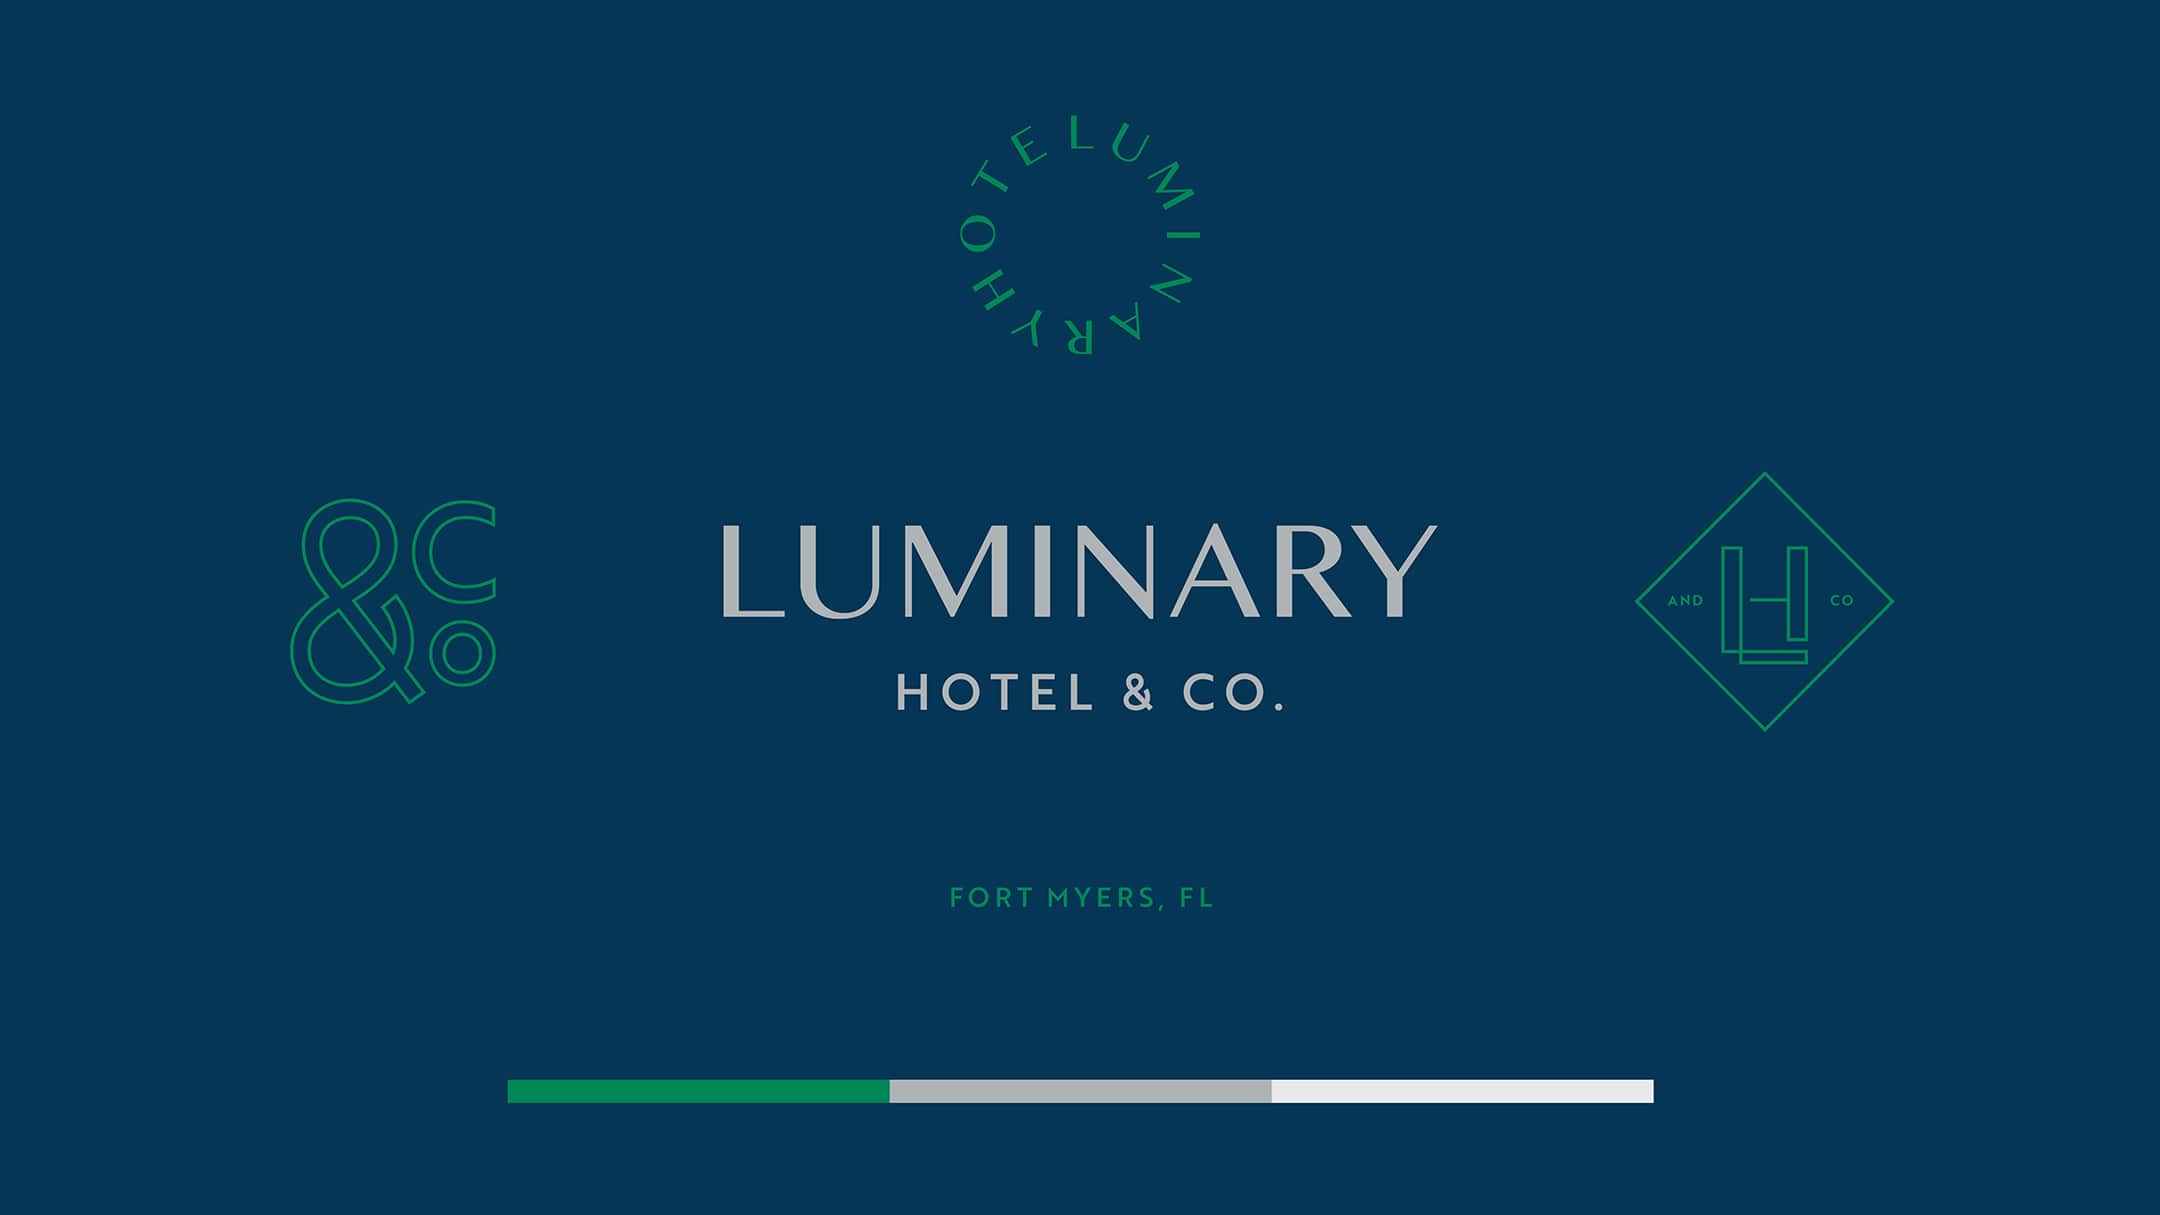 hotel branding work for luminary hotel and co